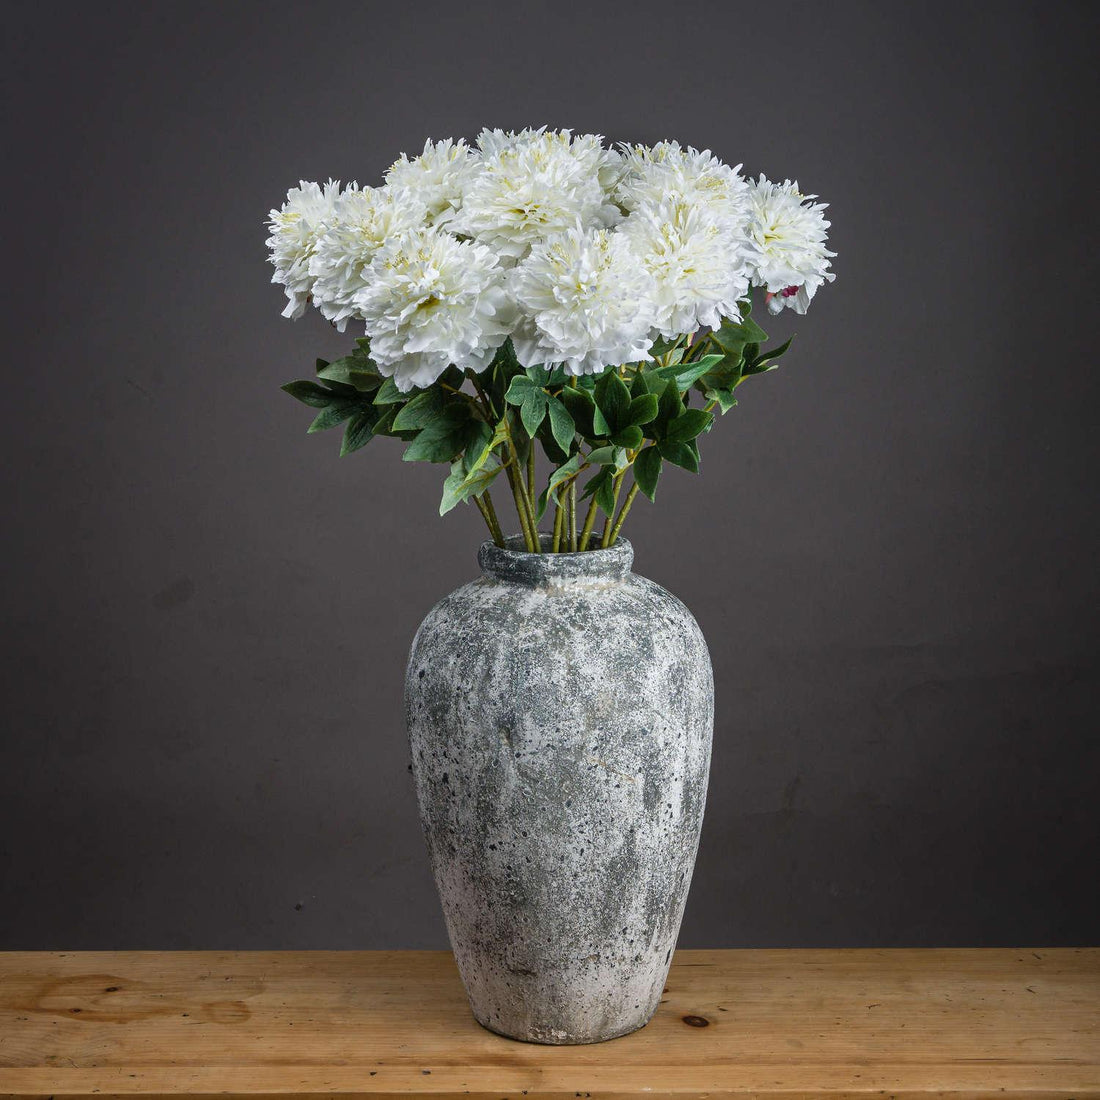 Classic White Peony - £19.95 - Artificial Flowers 